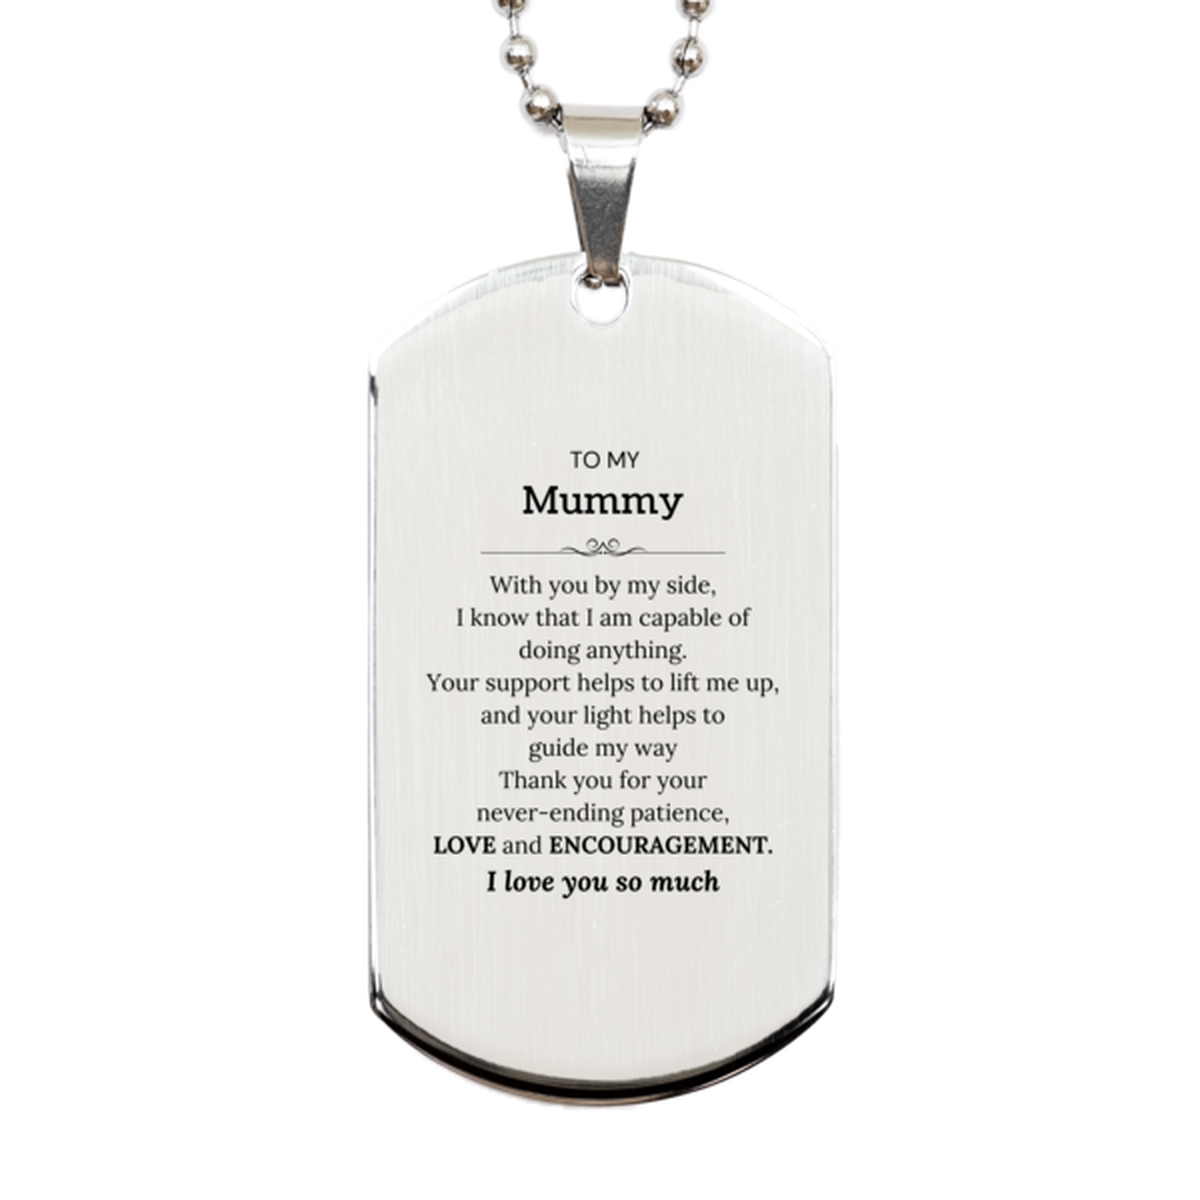 Appreciation Mummy Silver Dog Tag Gifts, To My Mummy Birthday Christmas Wedding Keepsake Gifts for Mummy With you by my side, I know that I am capable of doing anything. I love you so much